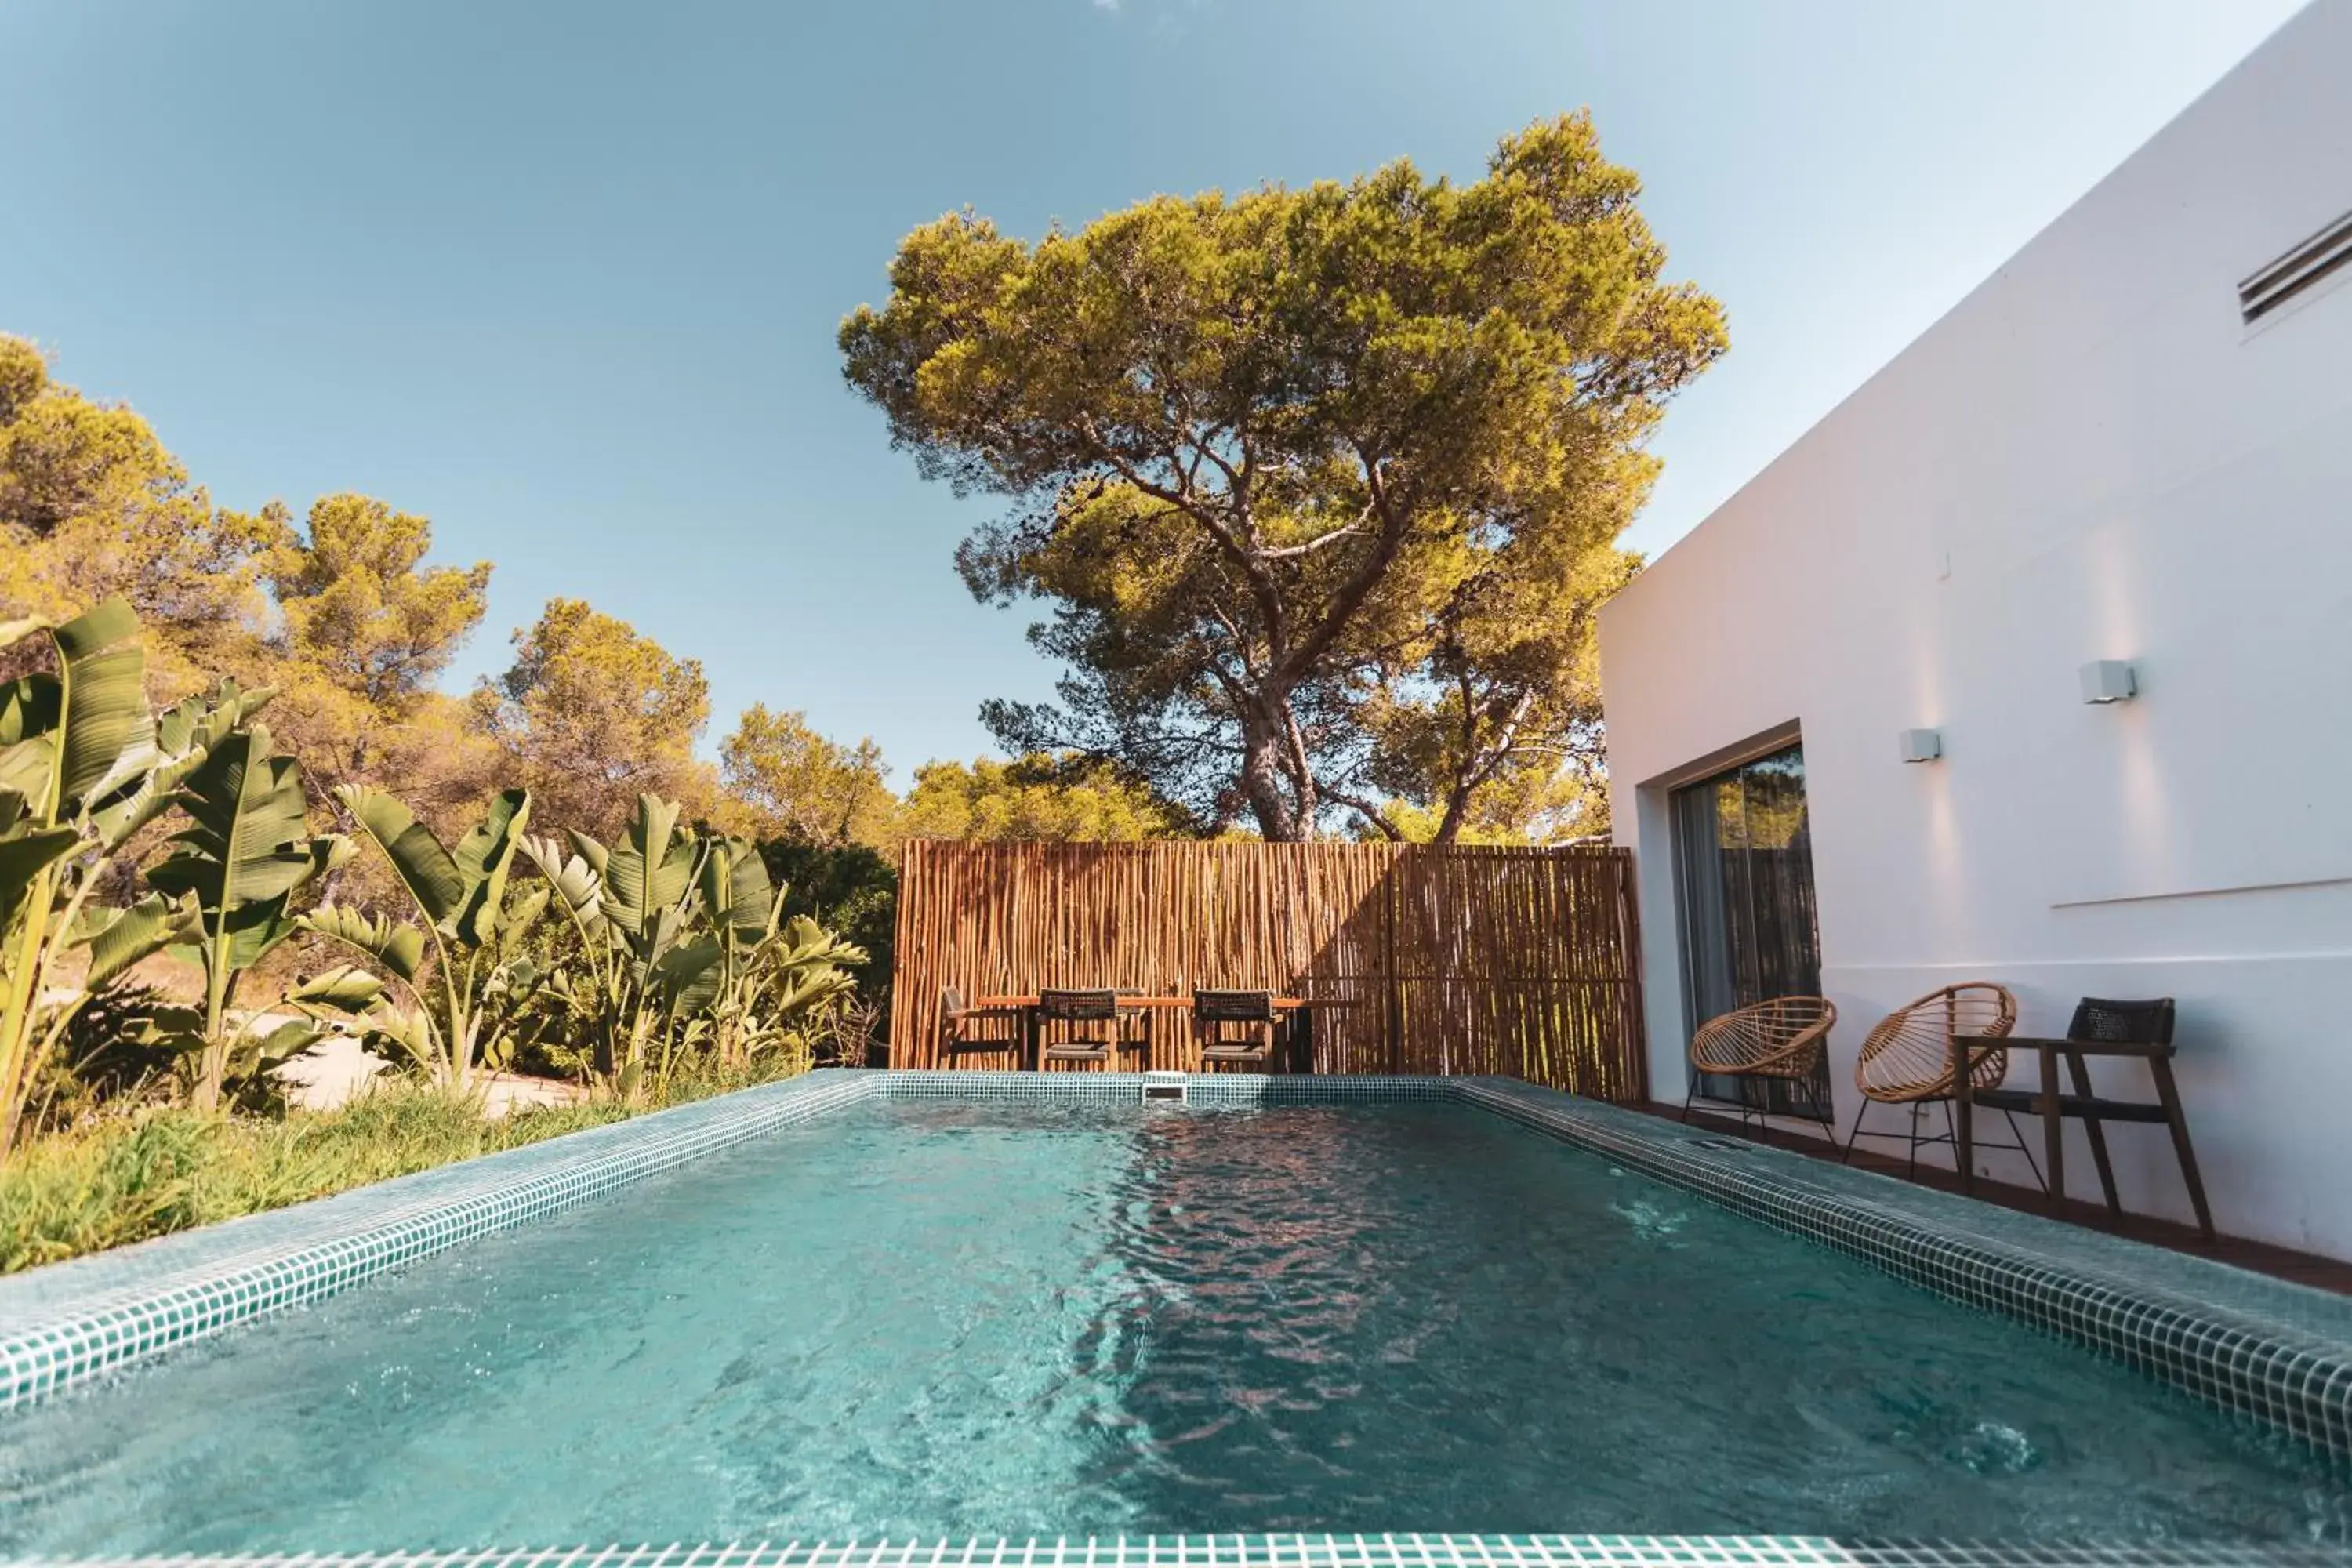 Swimming Pool in Destino Pacha Ibiza - Entrance to Pacha Club Included